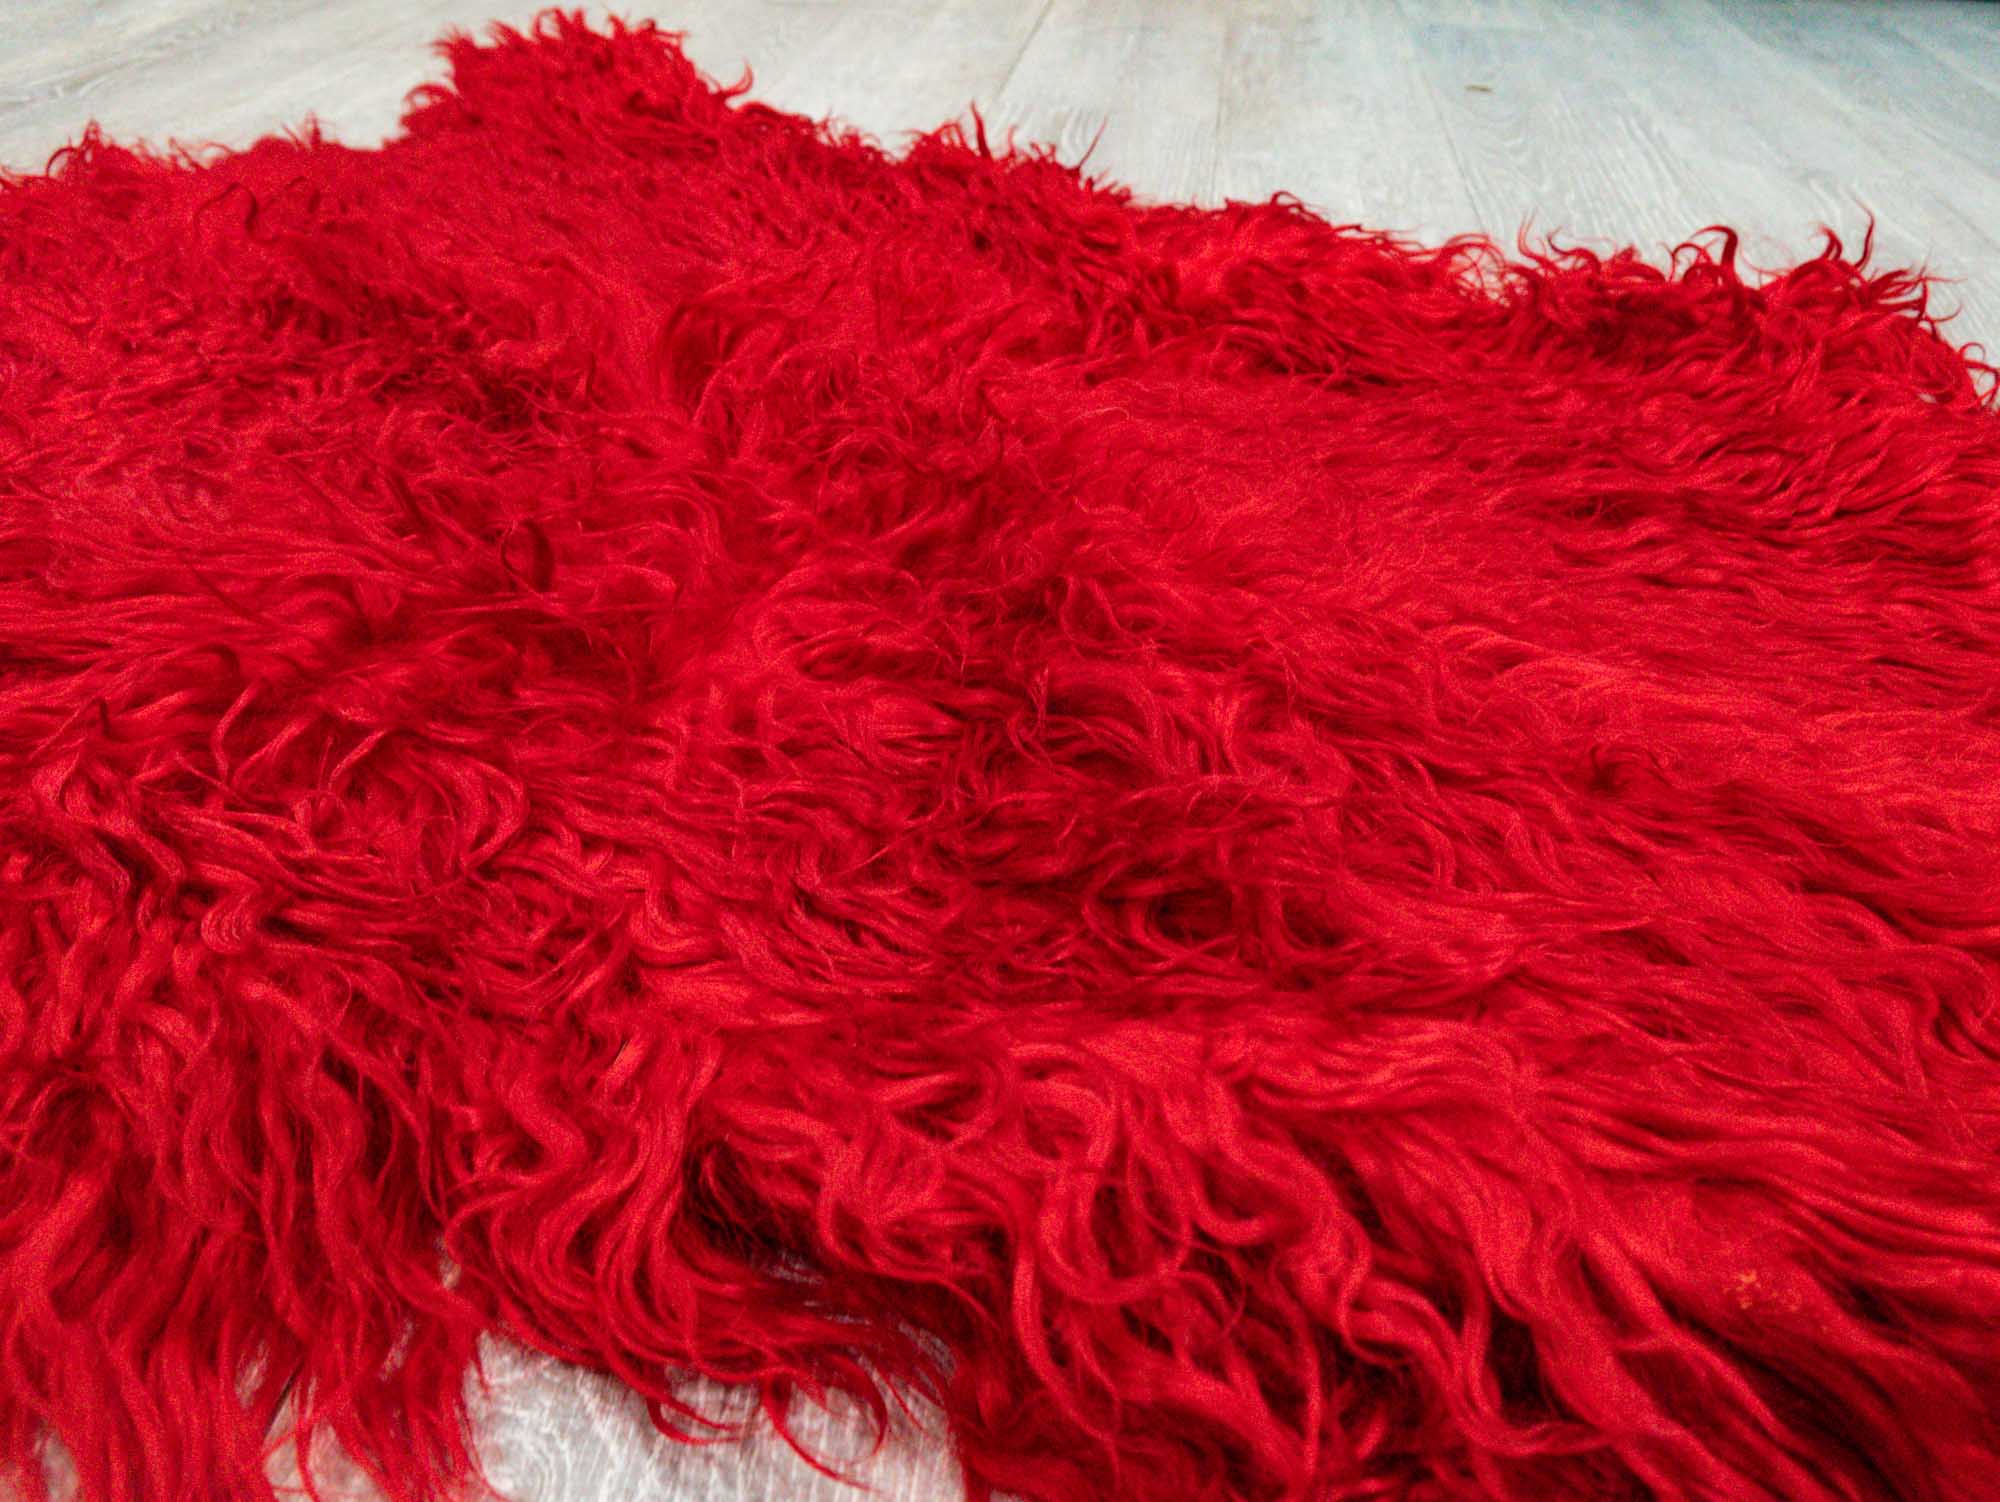 Dyed Angora Goatskin: #1: Extra Large: Red: Gallery Item - 66-A1XL-RD-G4980 (10UB06)